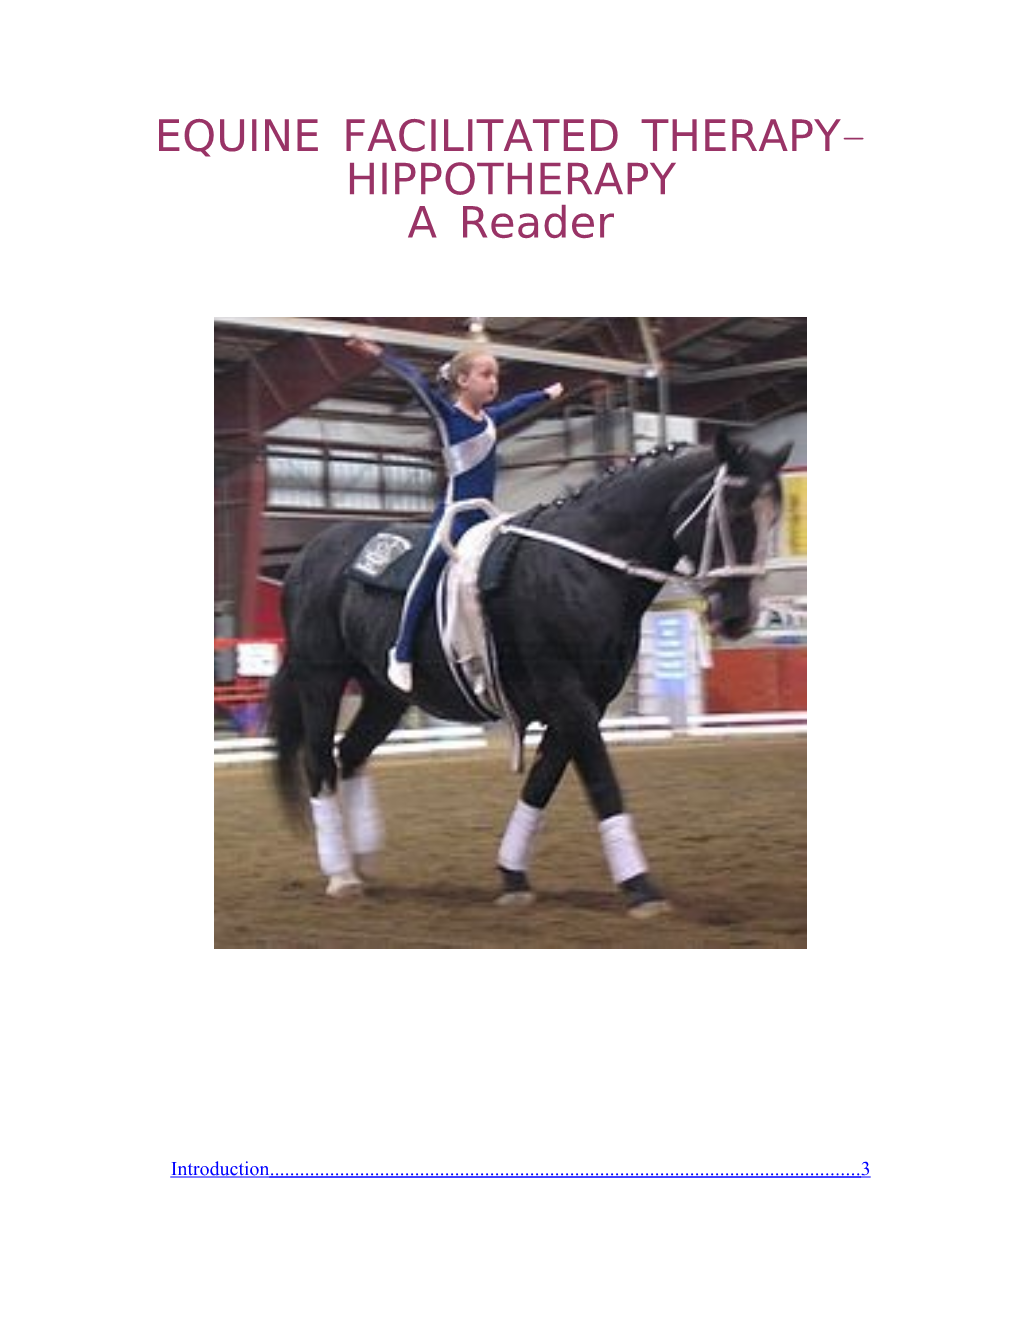 EQUINE FACILITATED THERAPY - HIPPOTHERAPY a Reader